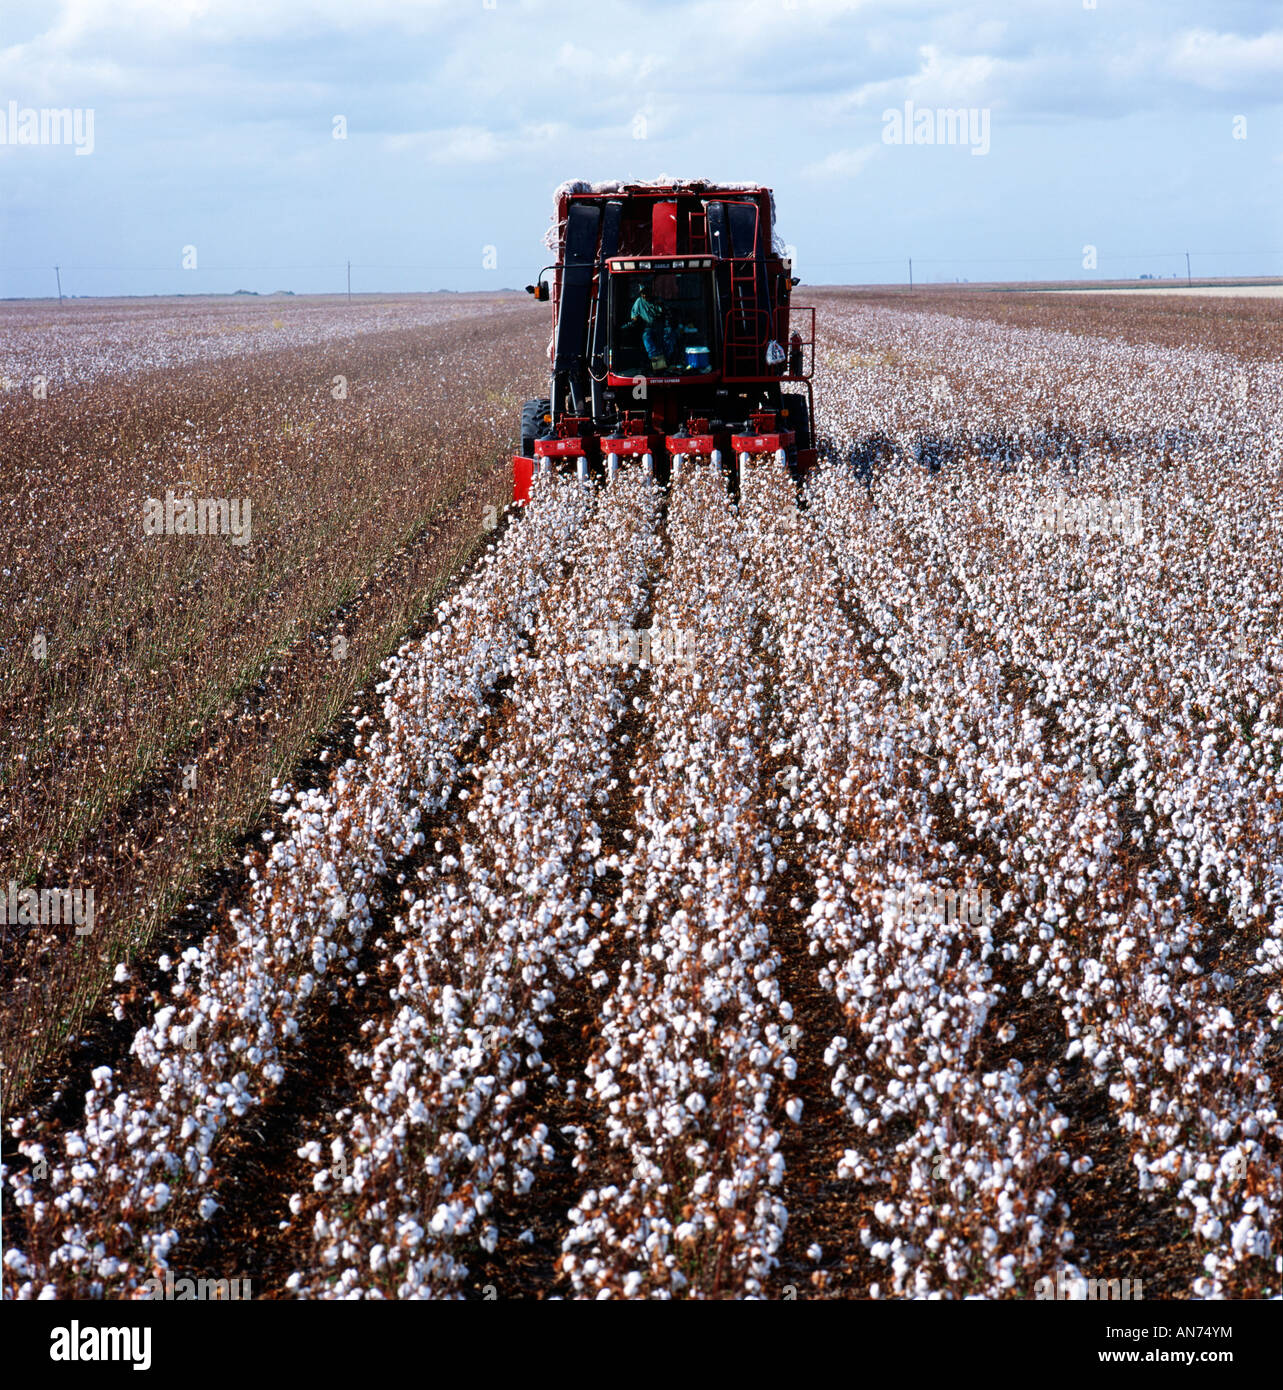 Automated cotton picking machine harvests a Texas cotton field Stock Photo